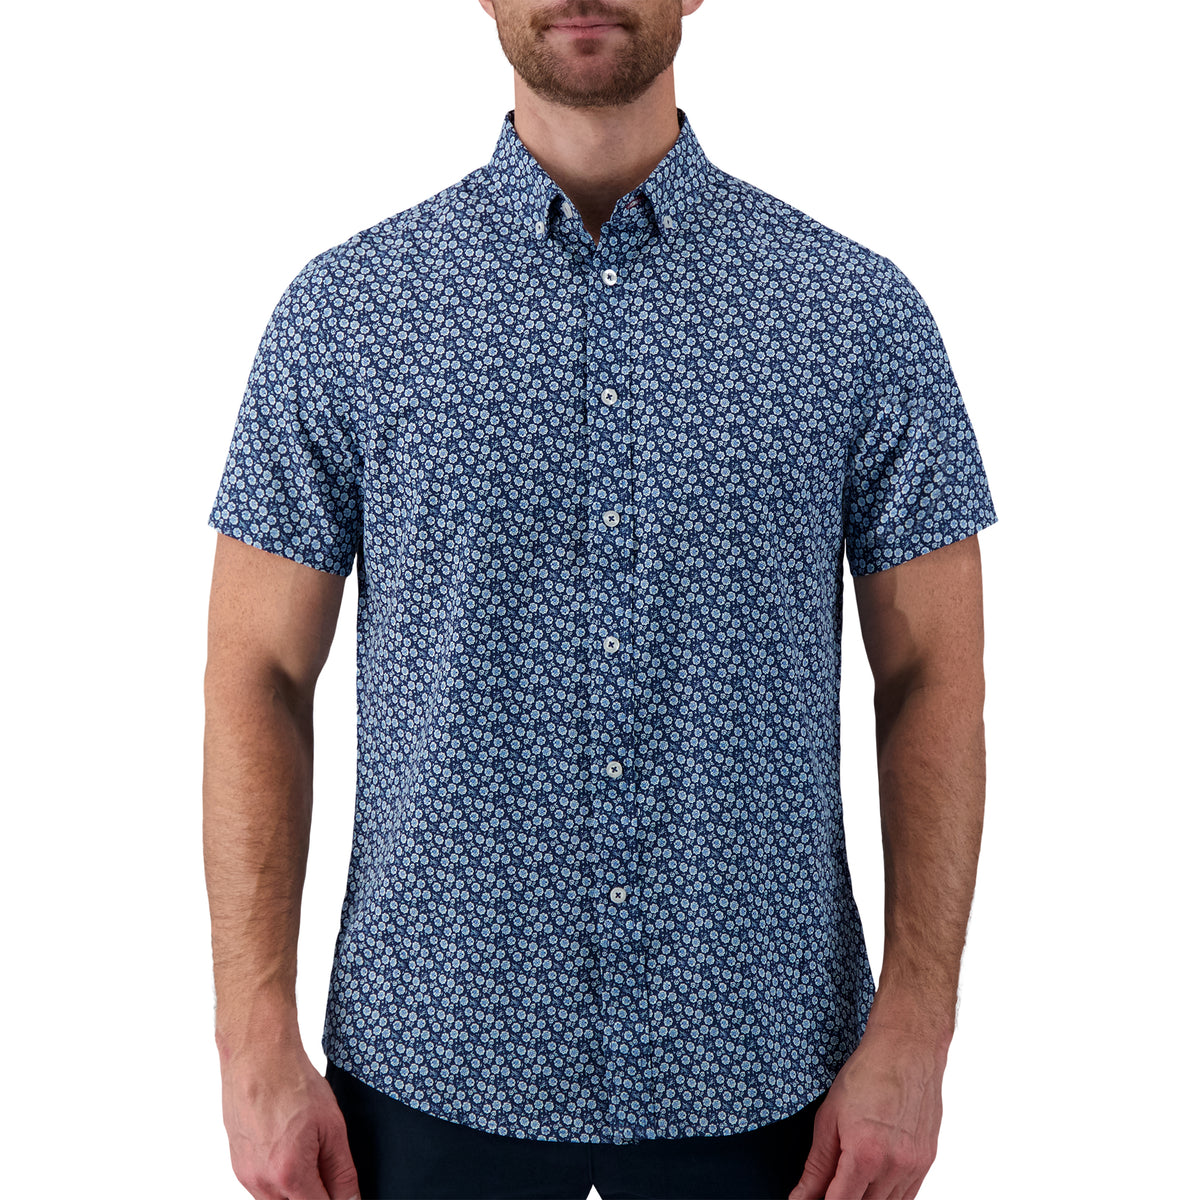 Navy Floral Recycled Shirt